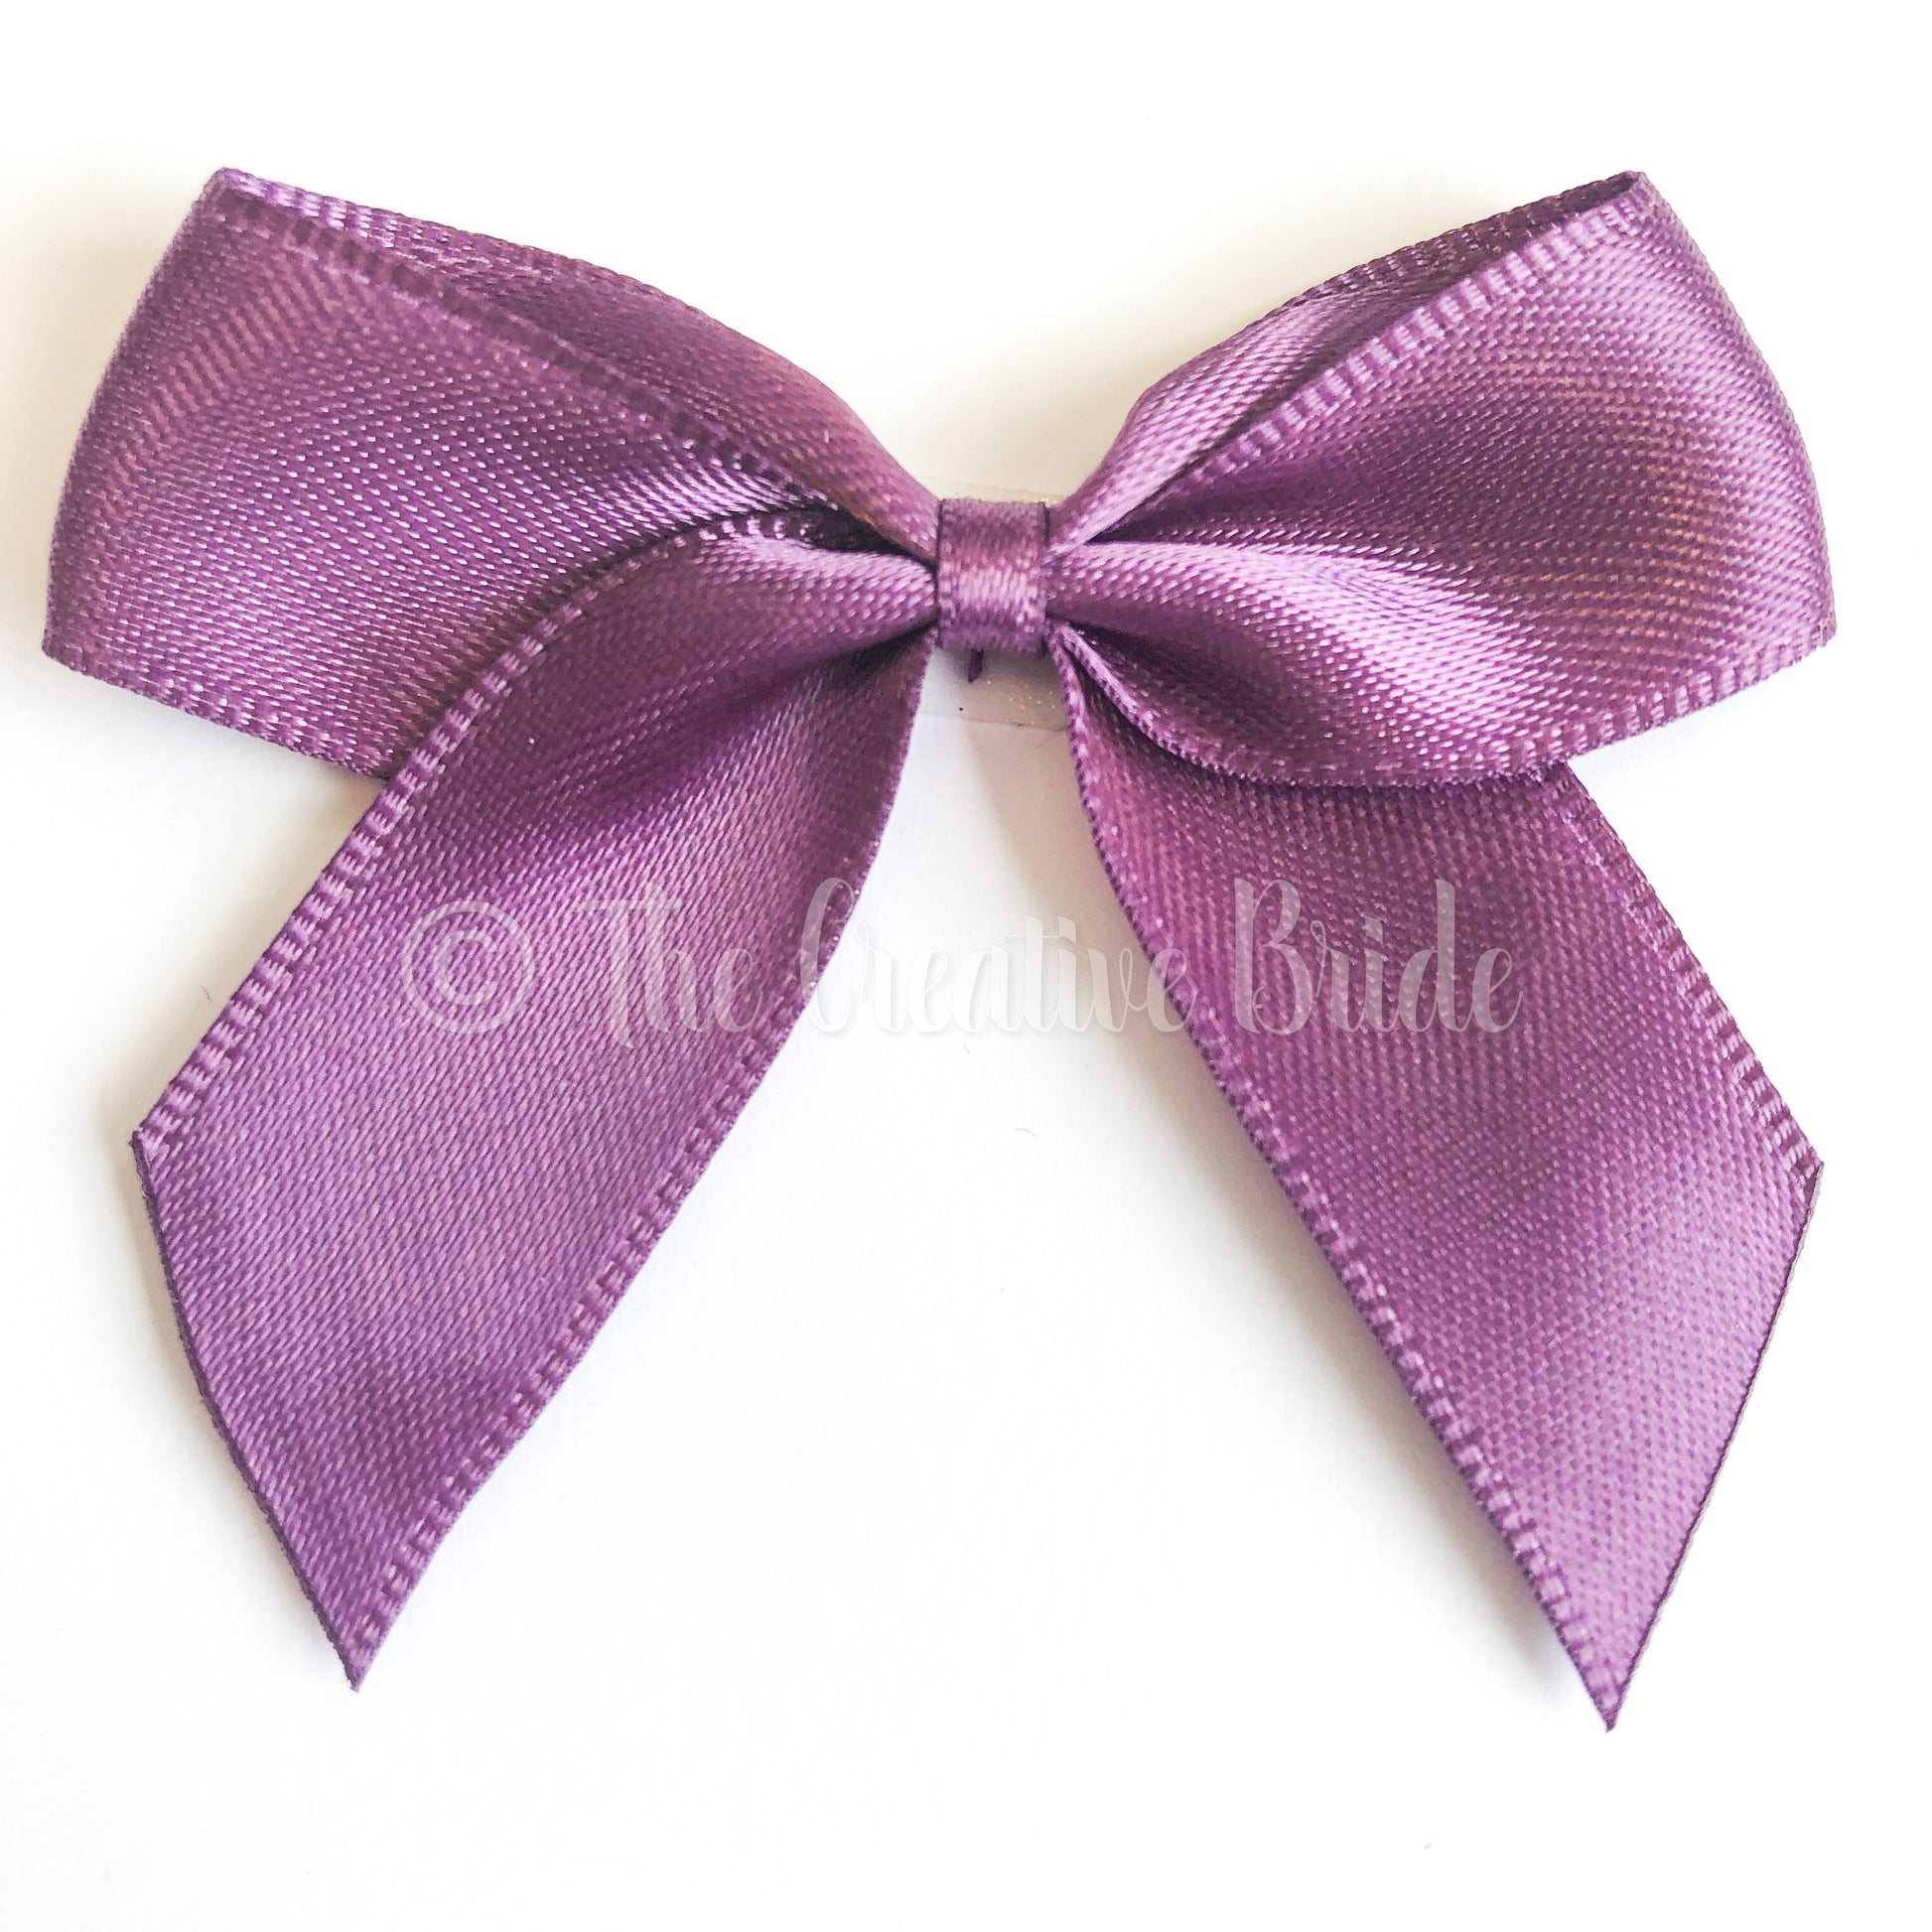 Satin Bows, Silk Bow, Red Satin Bow, Pink Bow, Mint Color Bow